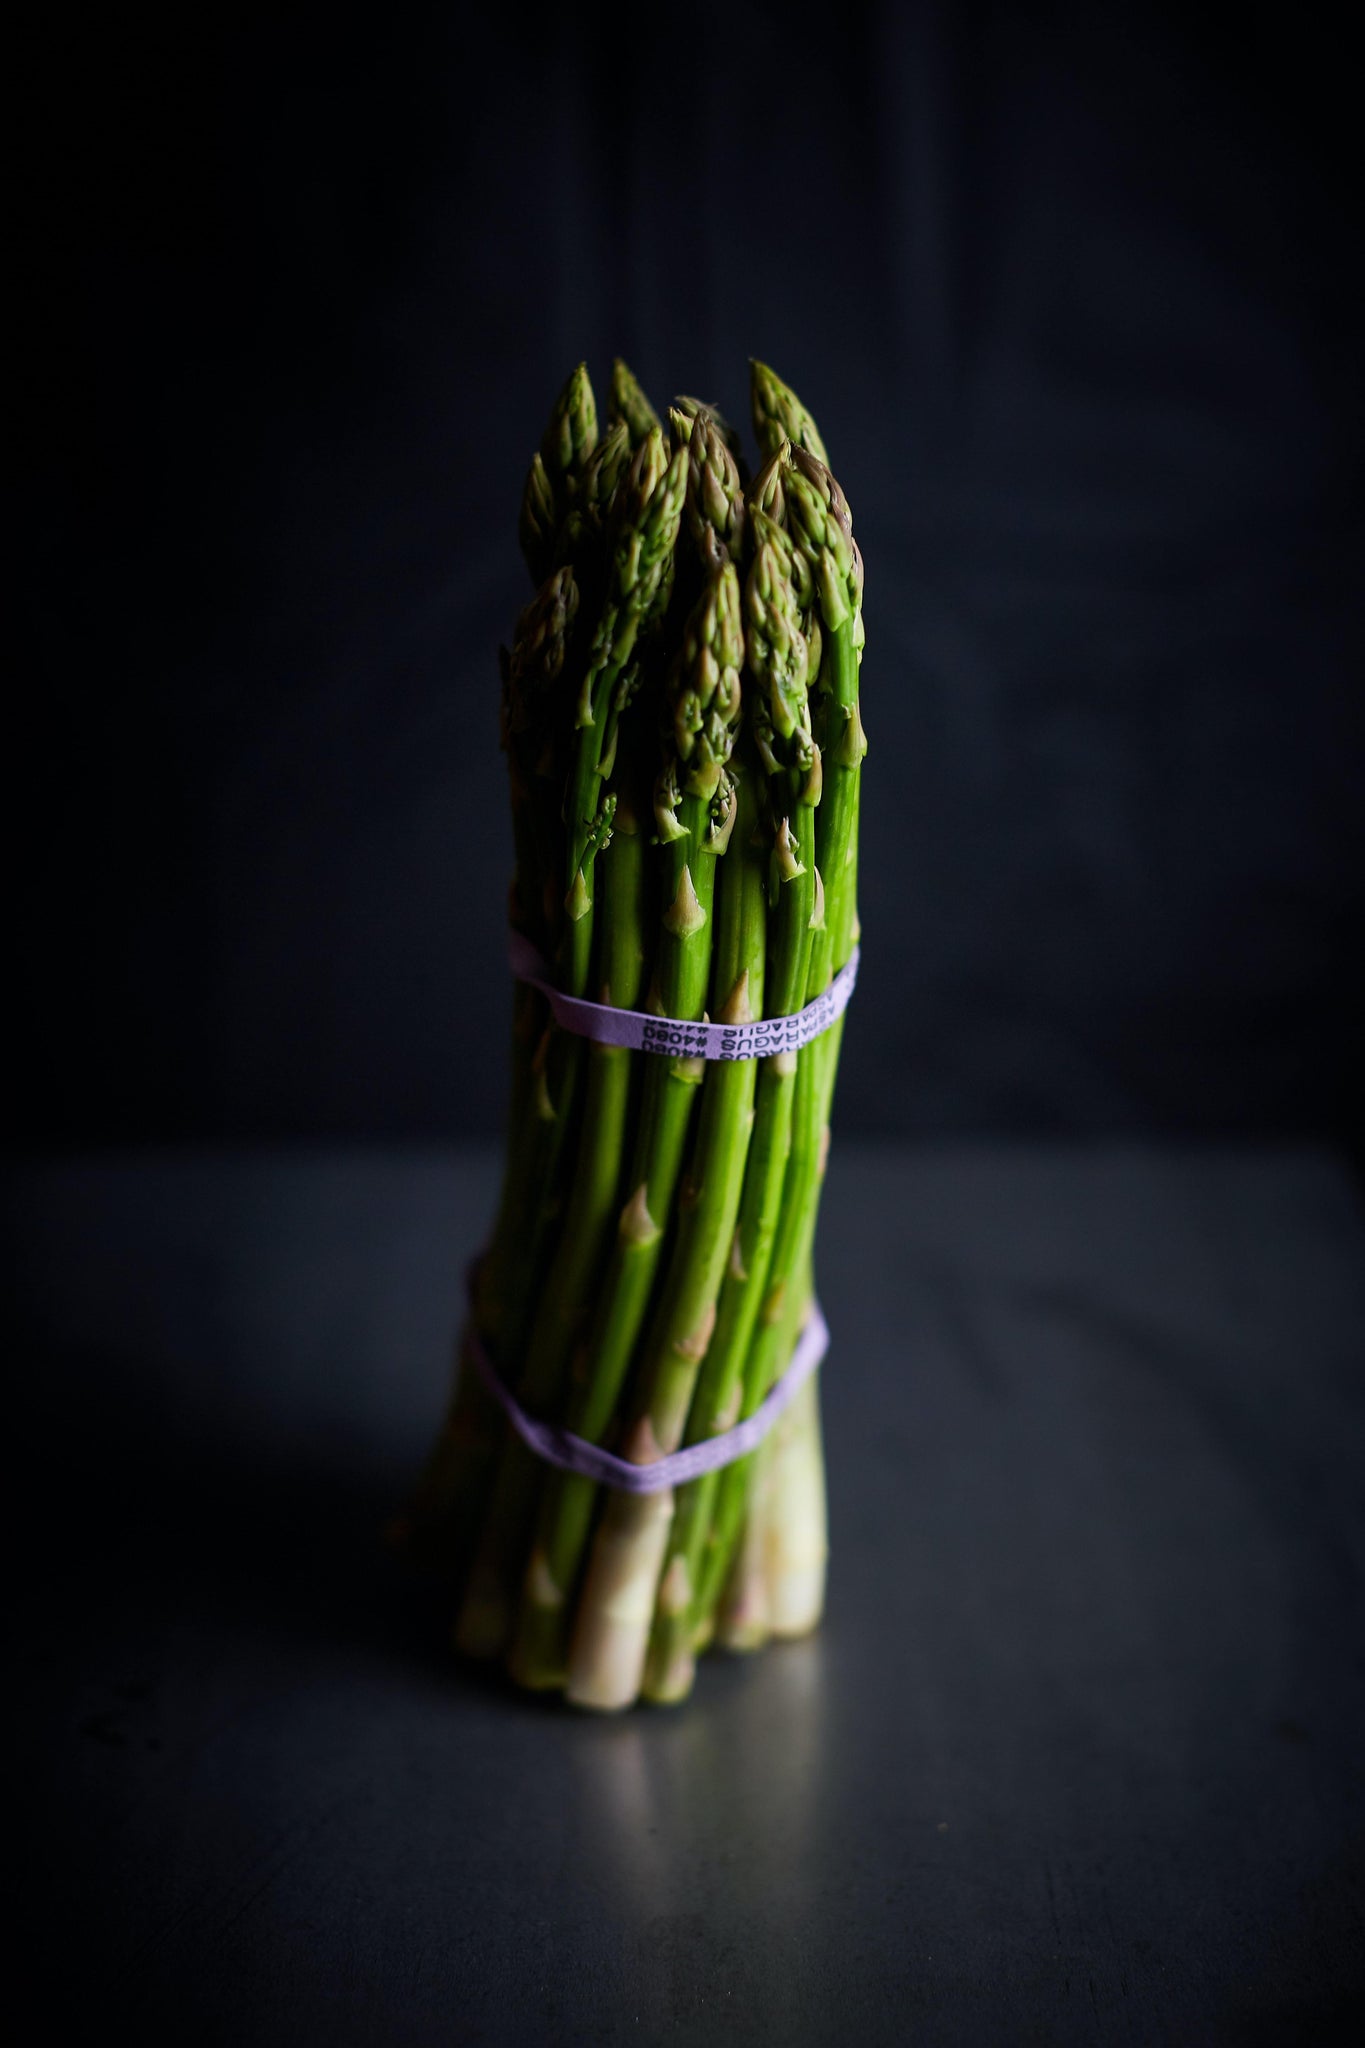 Asparagus - A Delightful Spring Vegetable And Many Ways To Cook It